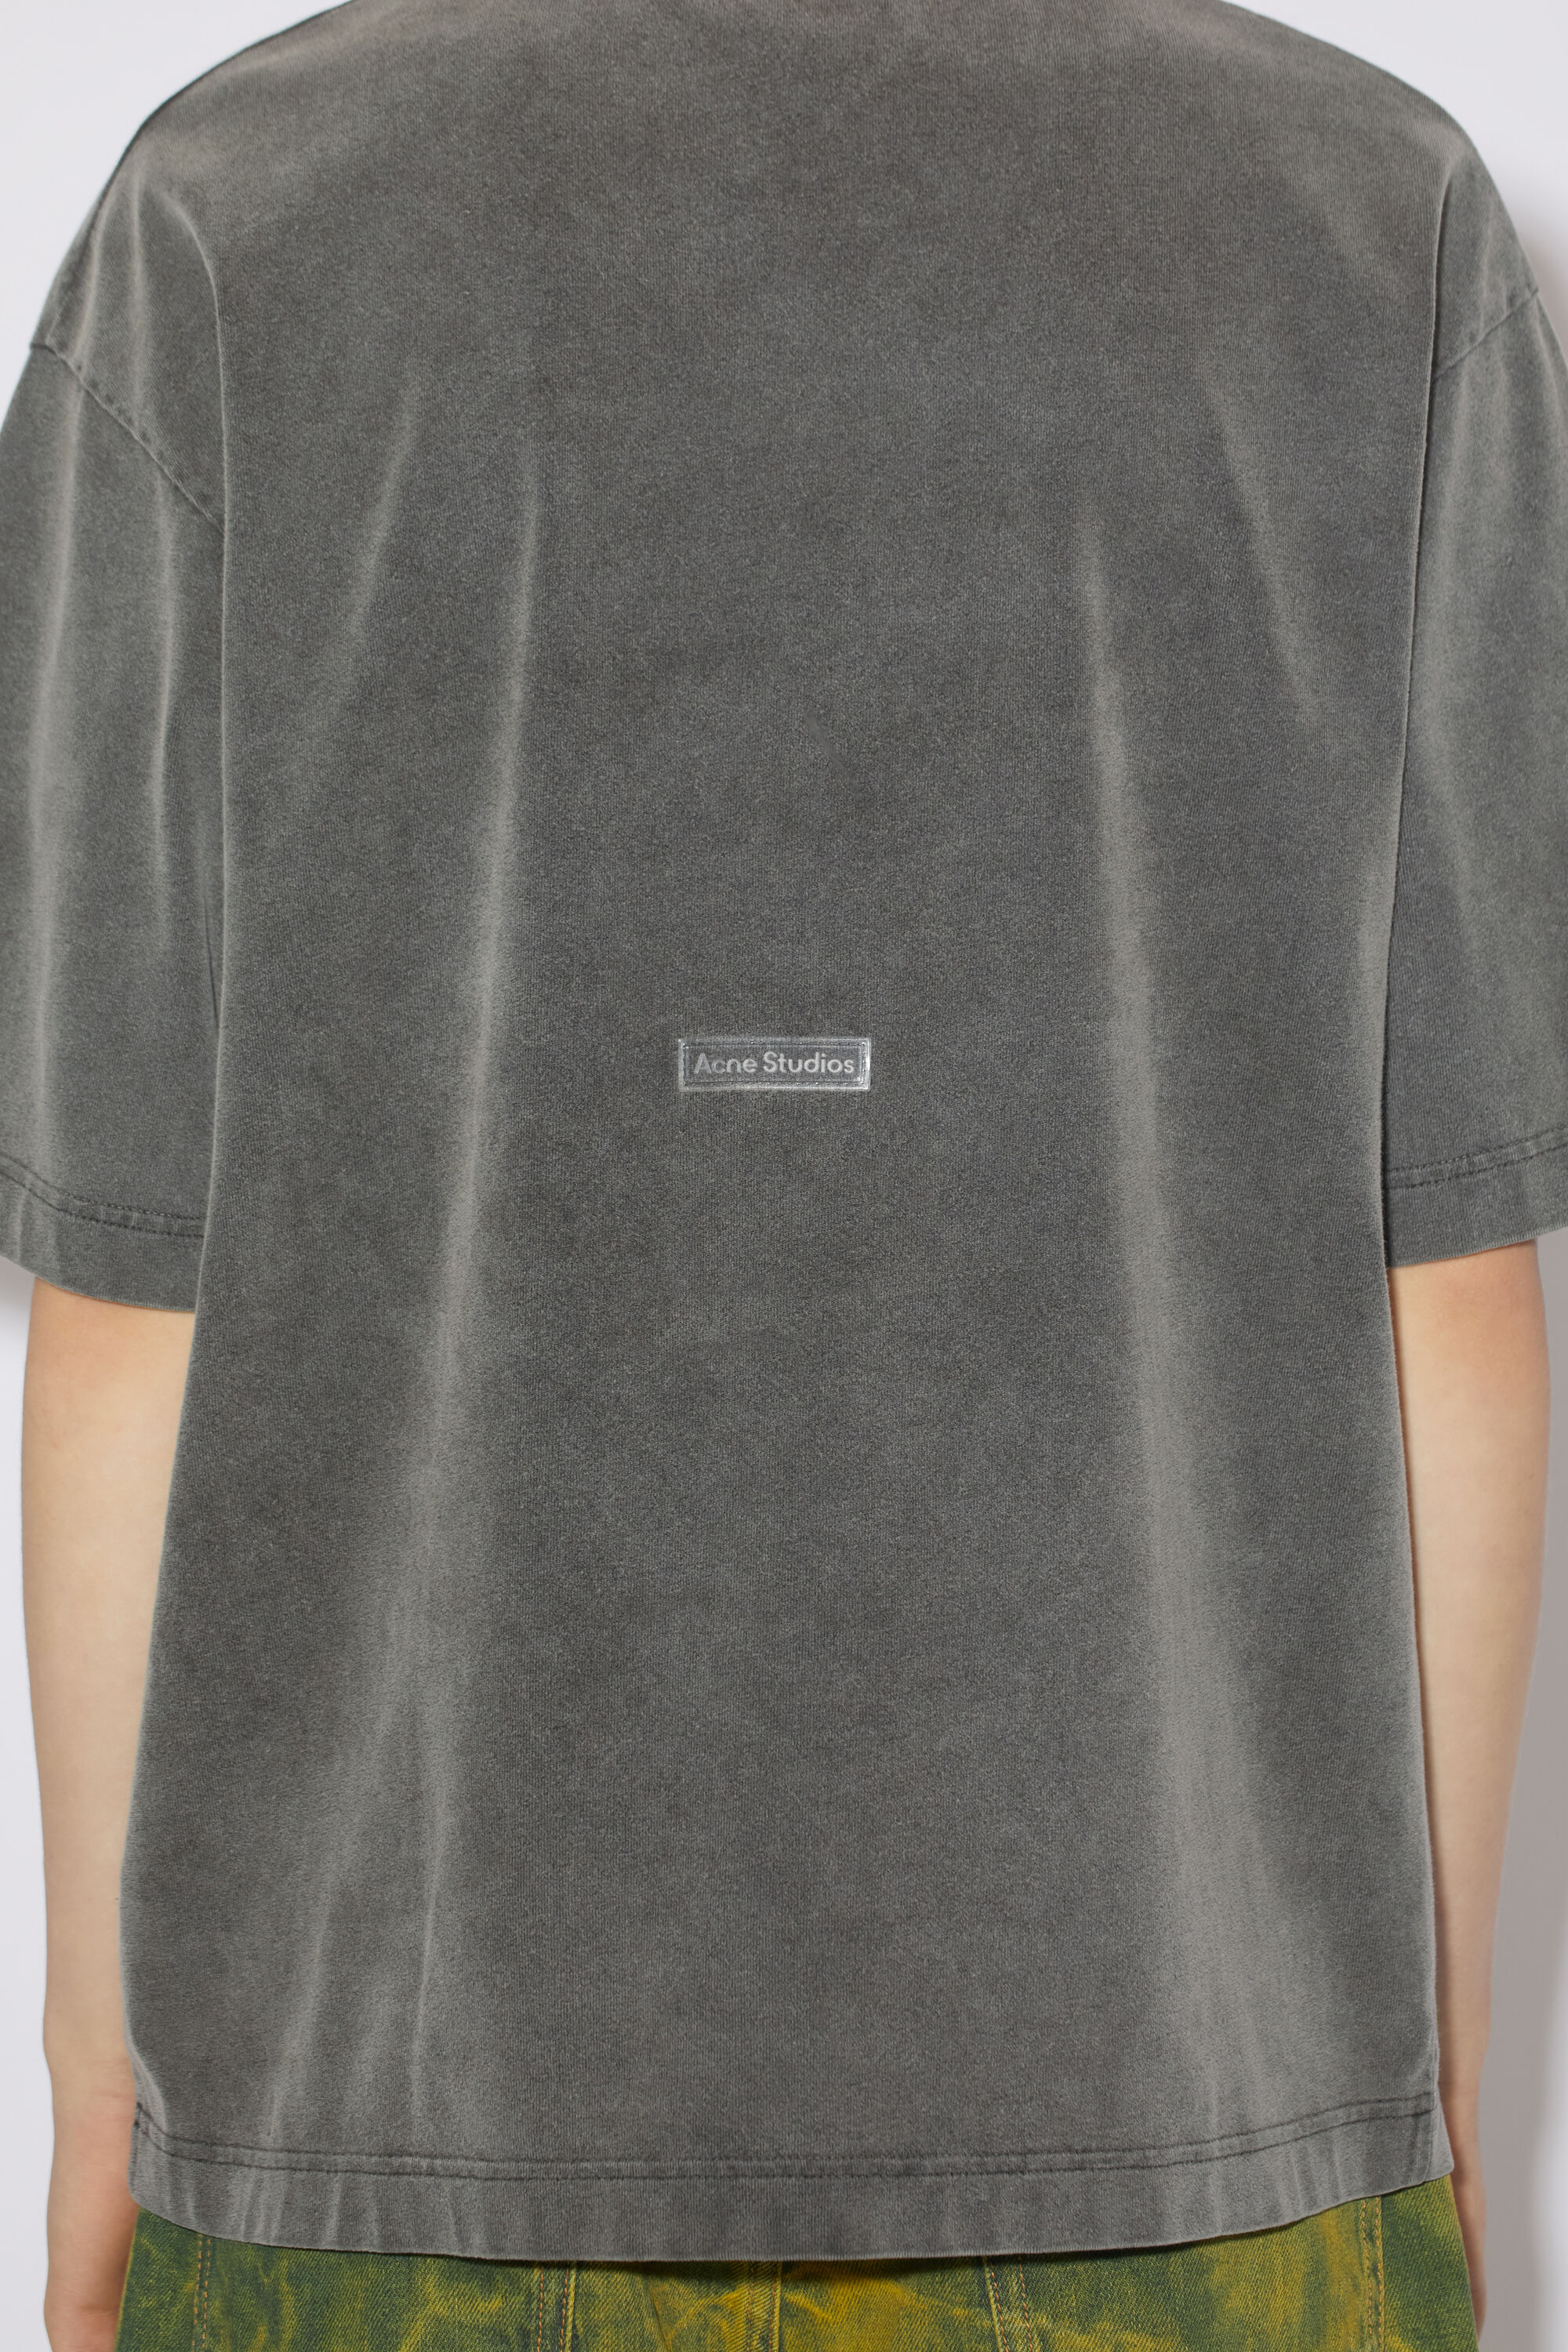 Acne Studios - Crew neck t-shirt - Relaxed fit - Faded black